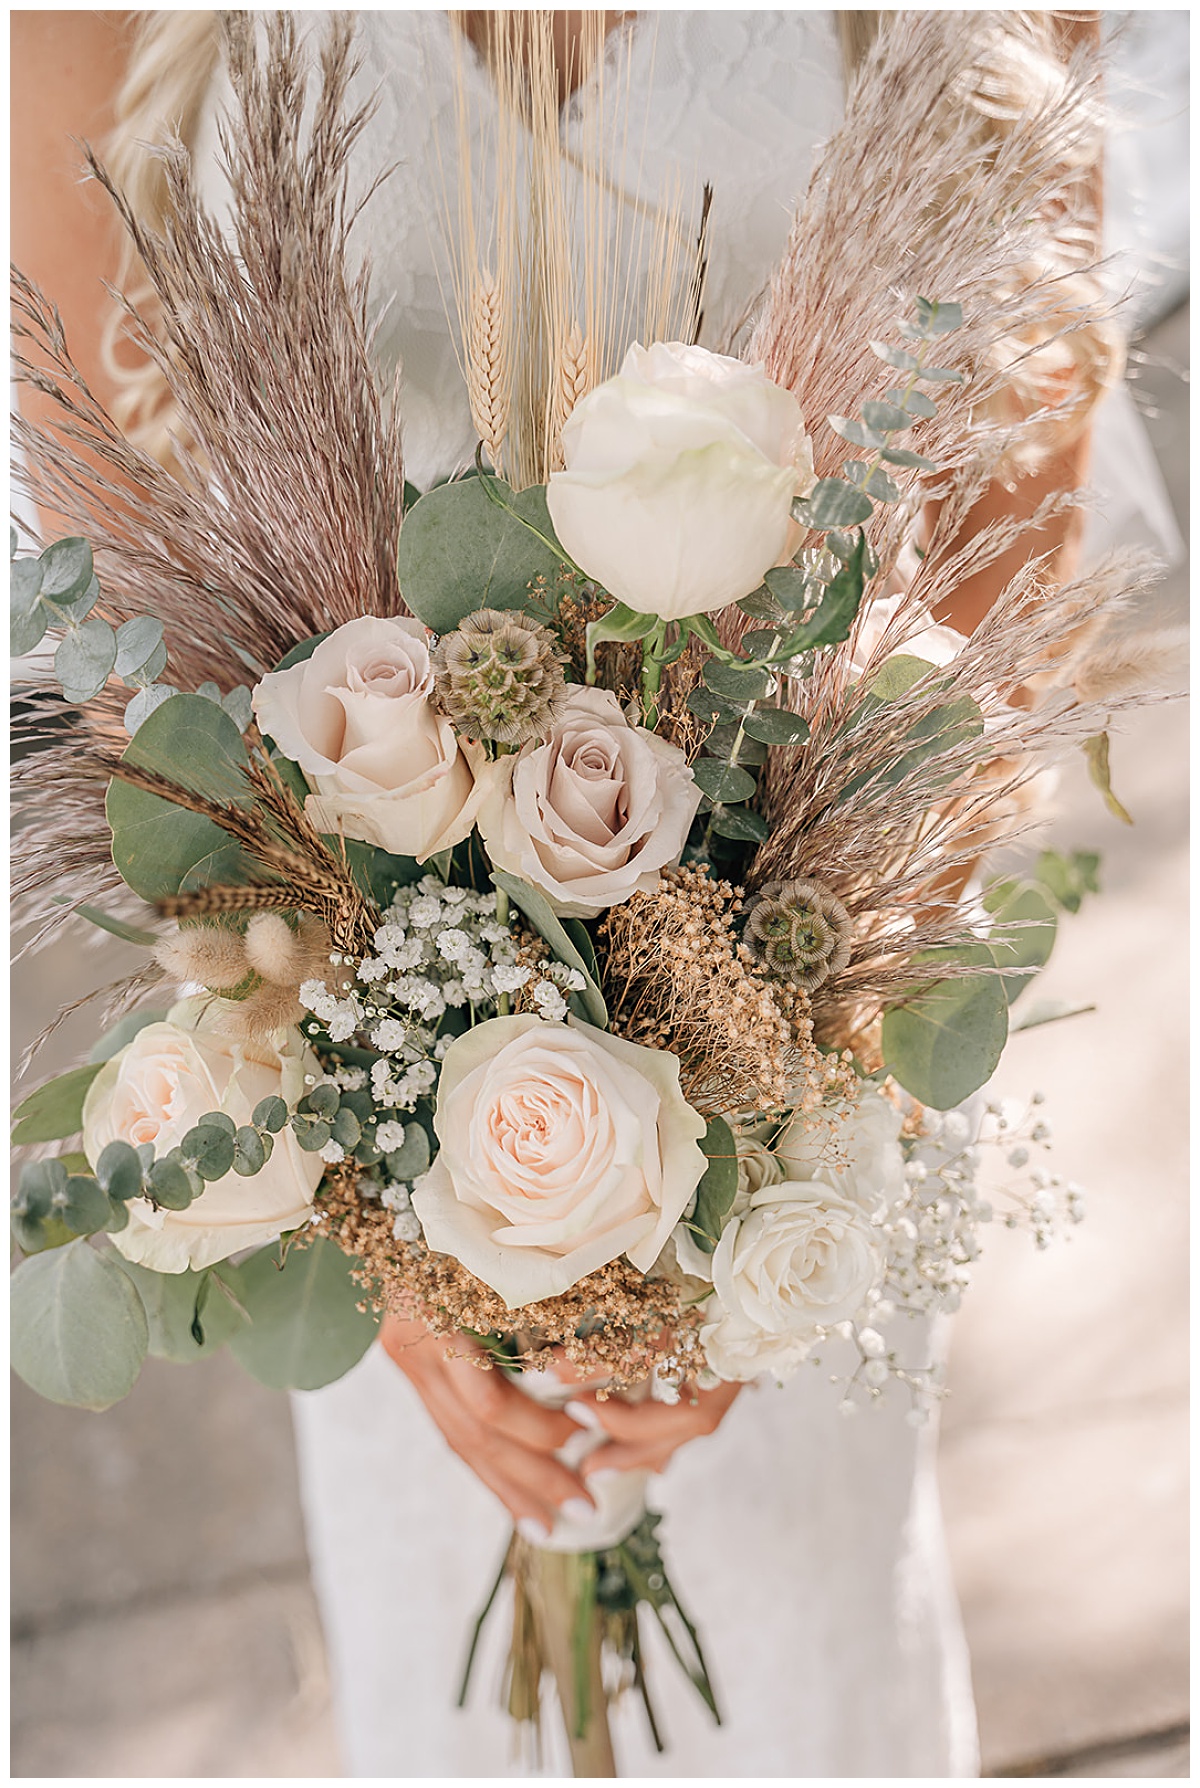 Soft Bohemian Bridal bouquet by Teal Truck Flowers in Sealy, Texas | Photography by Samantha O' Neal in Katy, Texas 